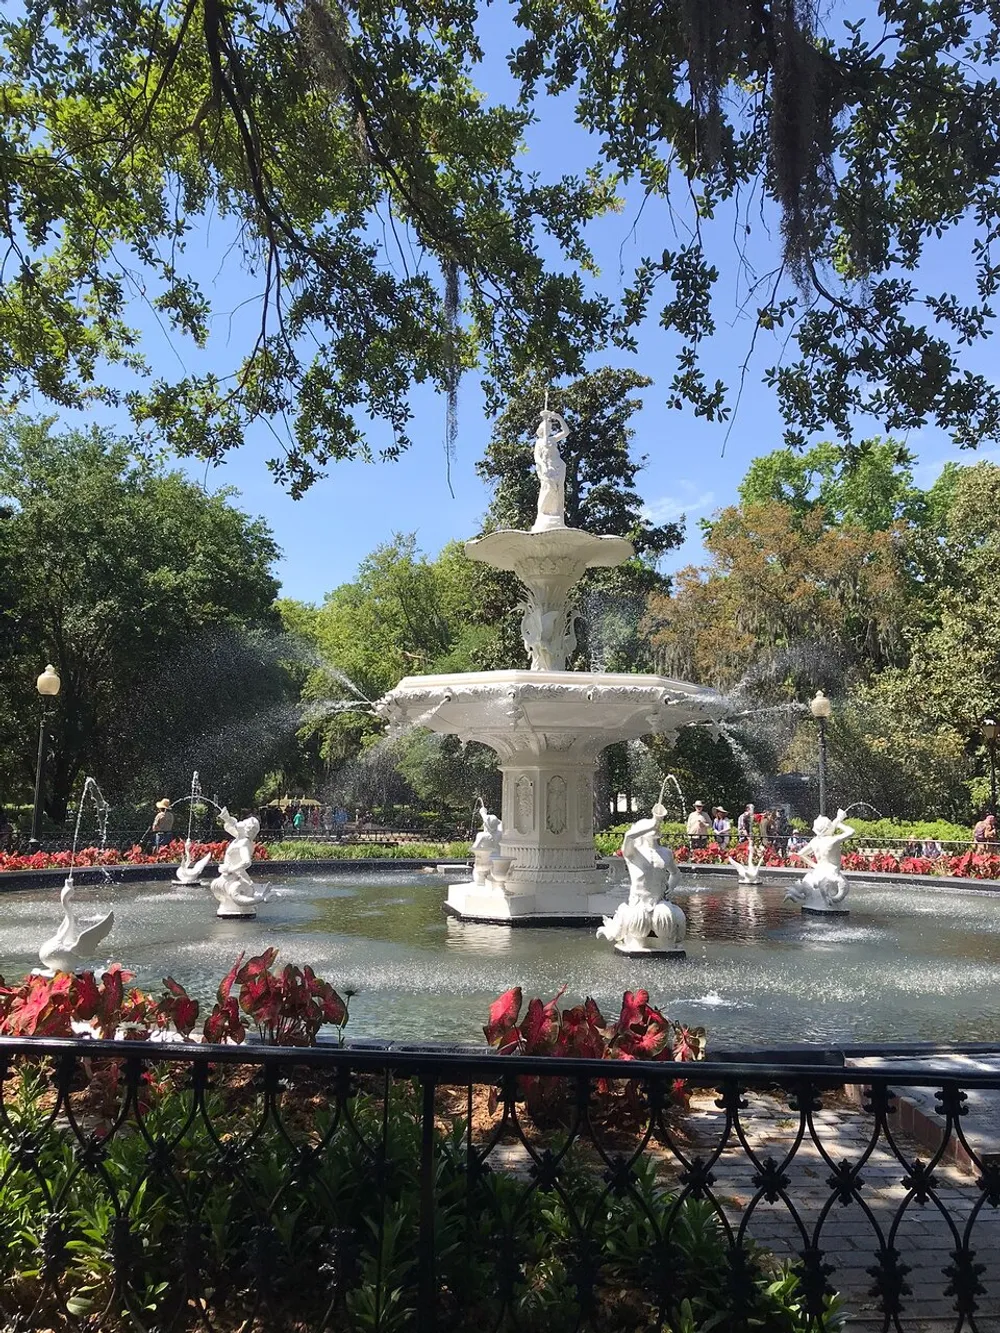 The image shows an ornate white fountain with water jets surrounded by greenery and red flowers framed by tree branches above and a black fence in the foreground on a sunny day